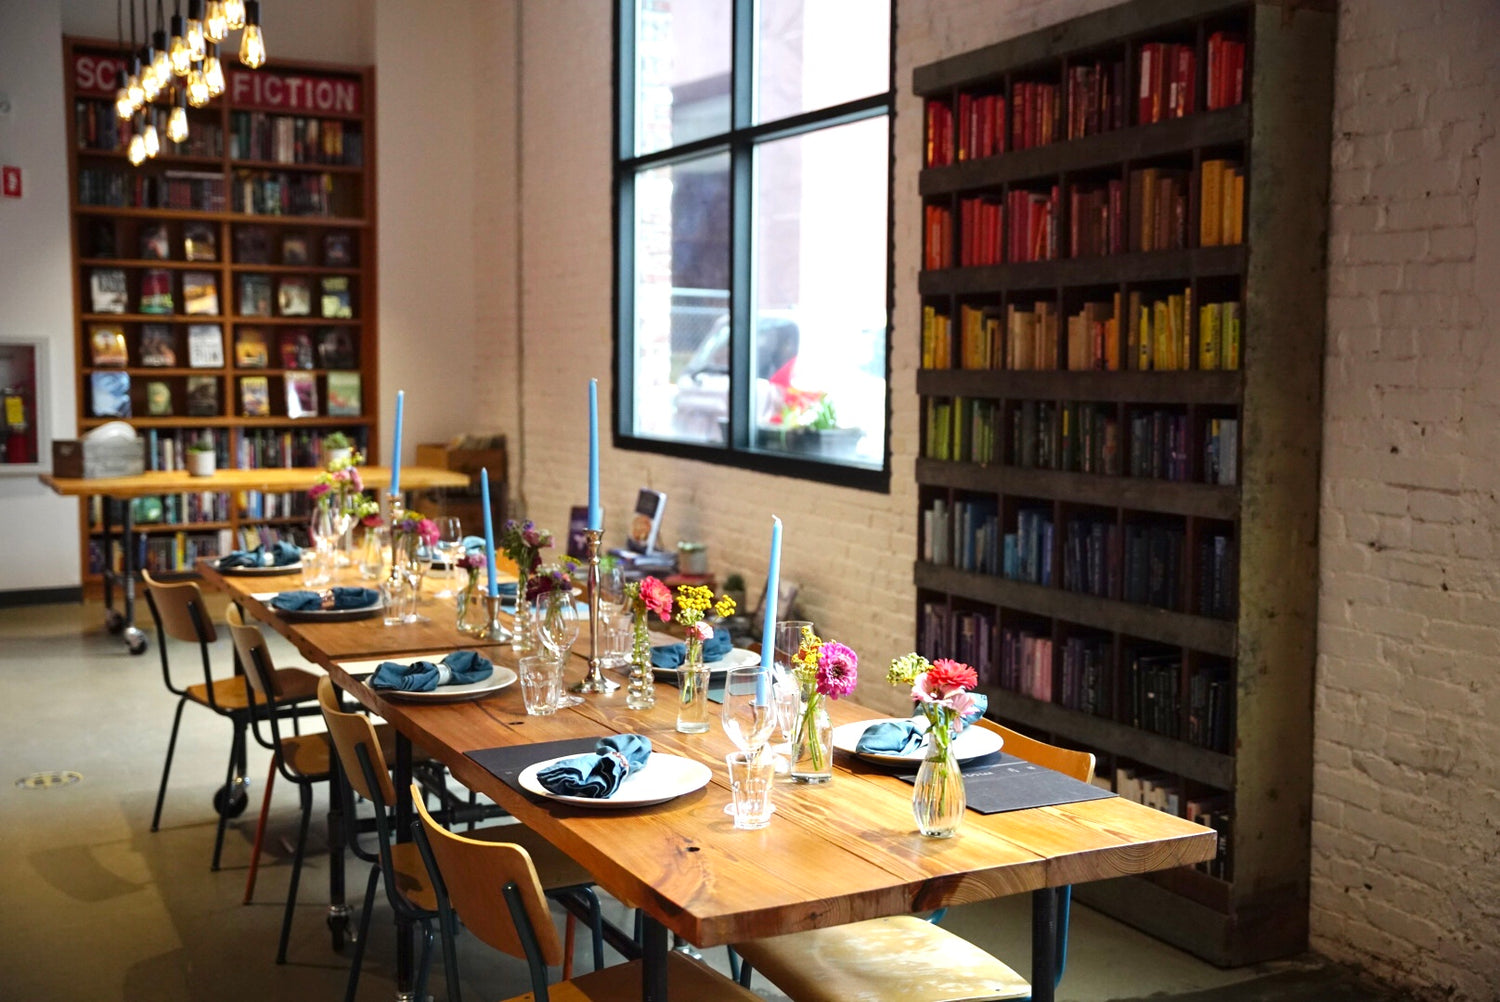 A formal dining setup in a bookstore, adorned with elegant bookshelves and a meticulously arranged table